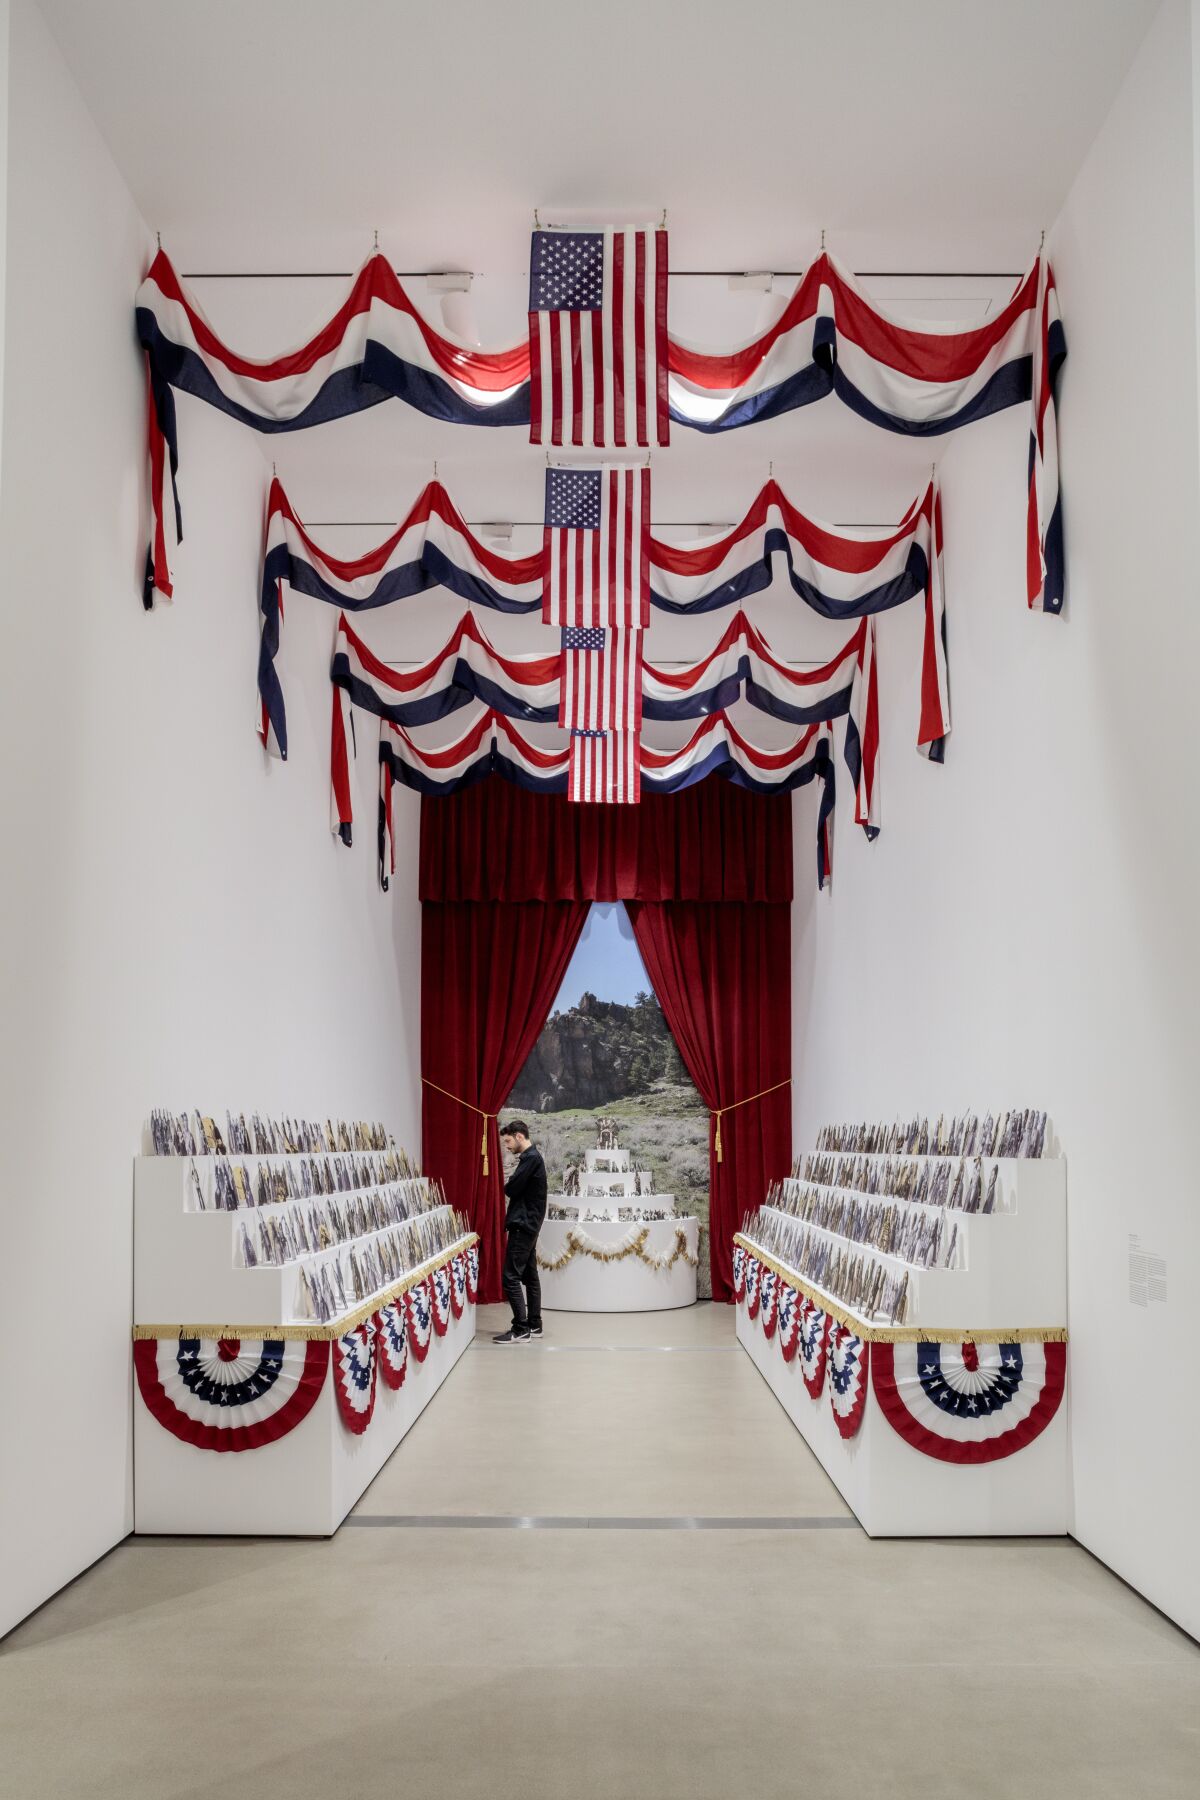 Flags and red, white and blue bunting decorate an alcove with rows of photos.